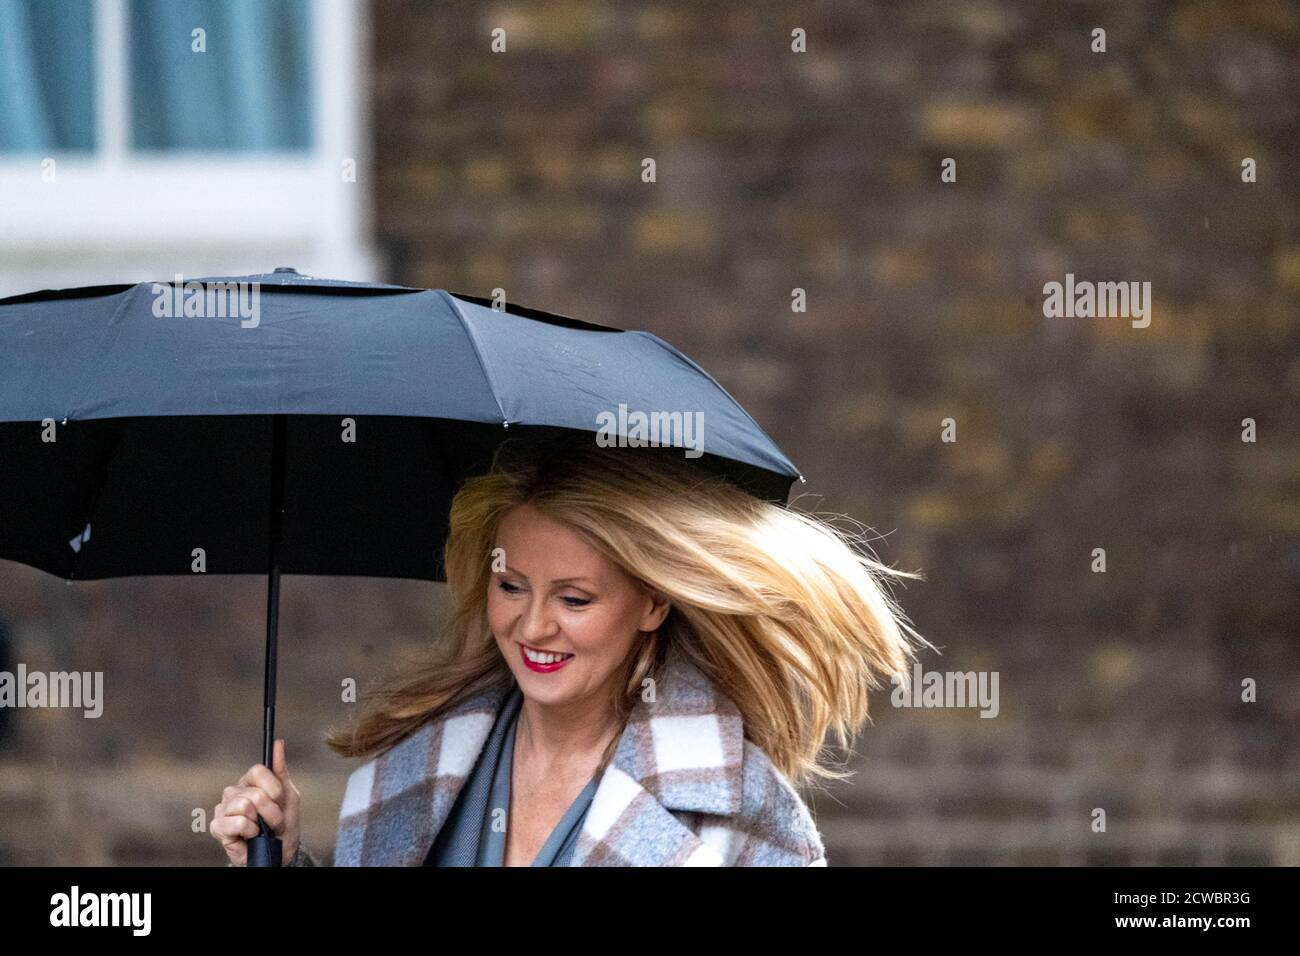 London 29th September 2020 Esther McVey MP for Tatton and founder of the Blue collar conservatives visits 11 Downing Street London Credit: Ian Davidson/Alamy Live News Stock Photo